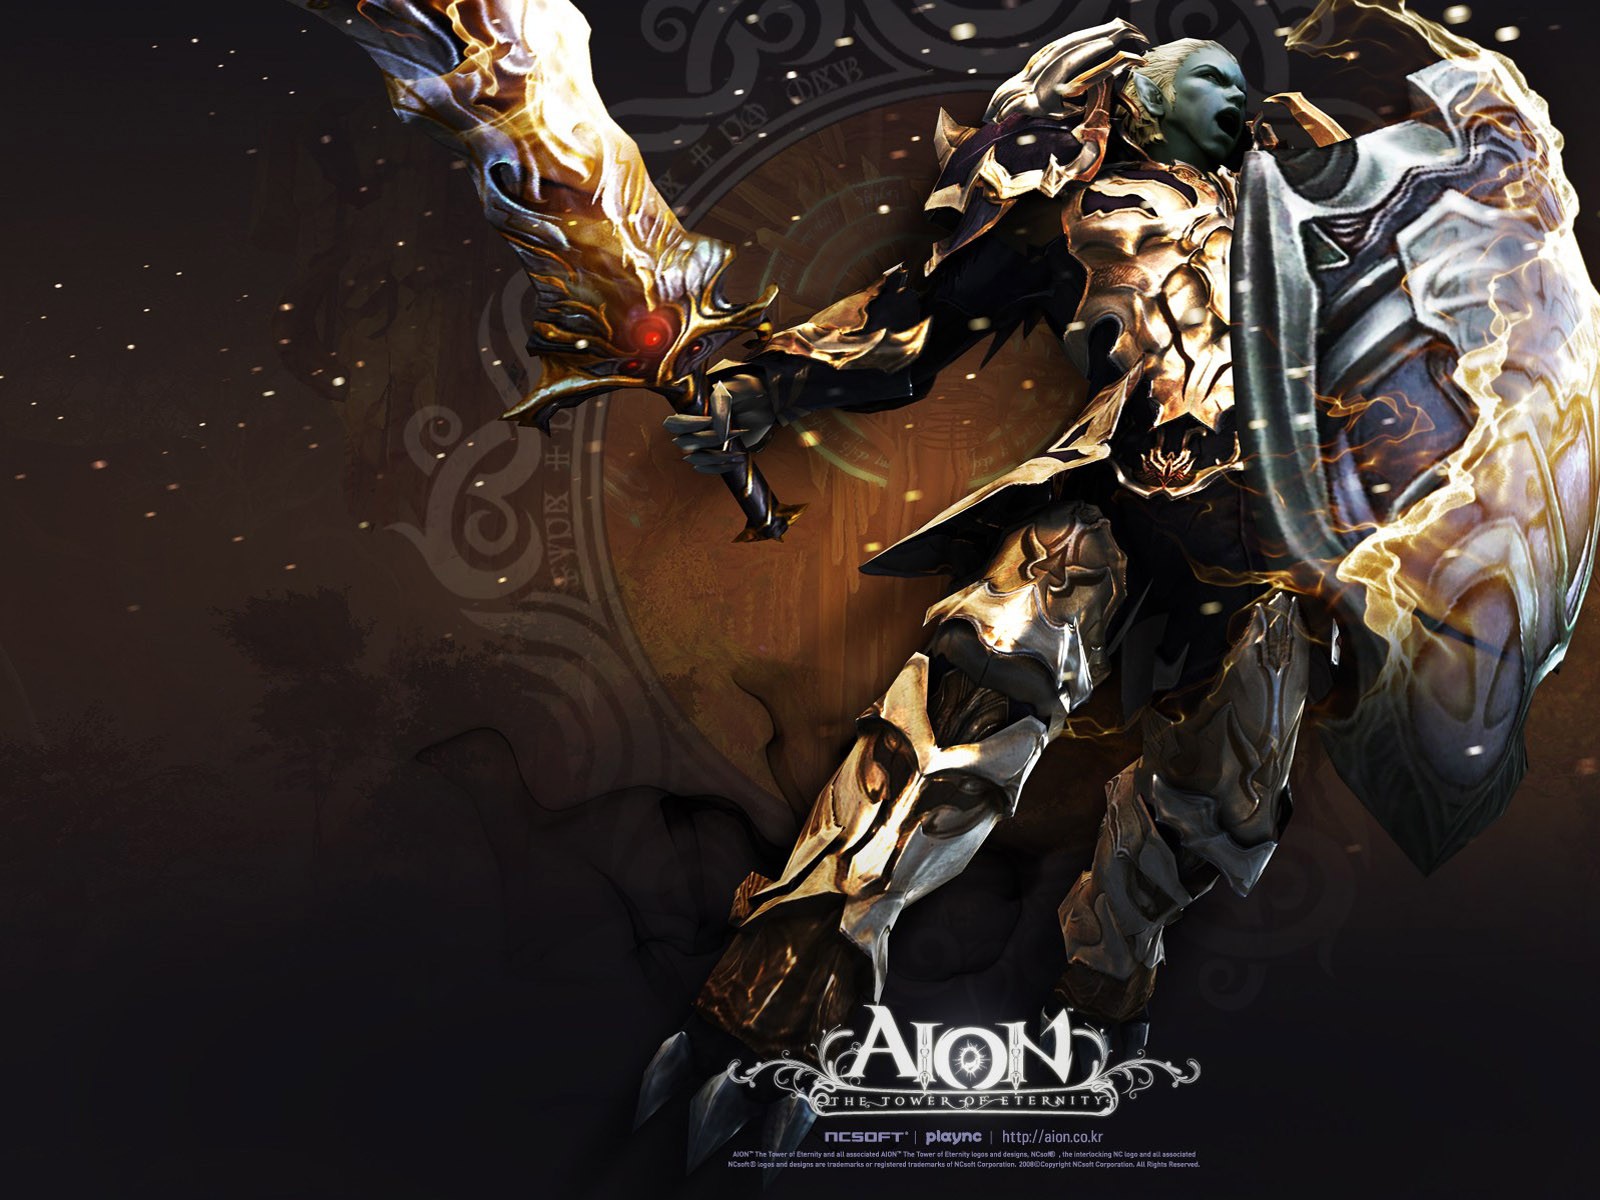 Aion modeling HD gaming wallpapers #7 - 1600x1200